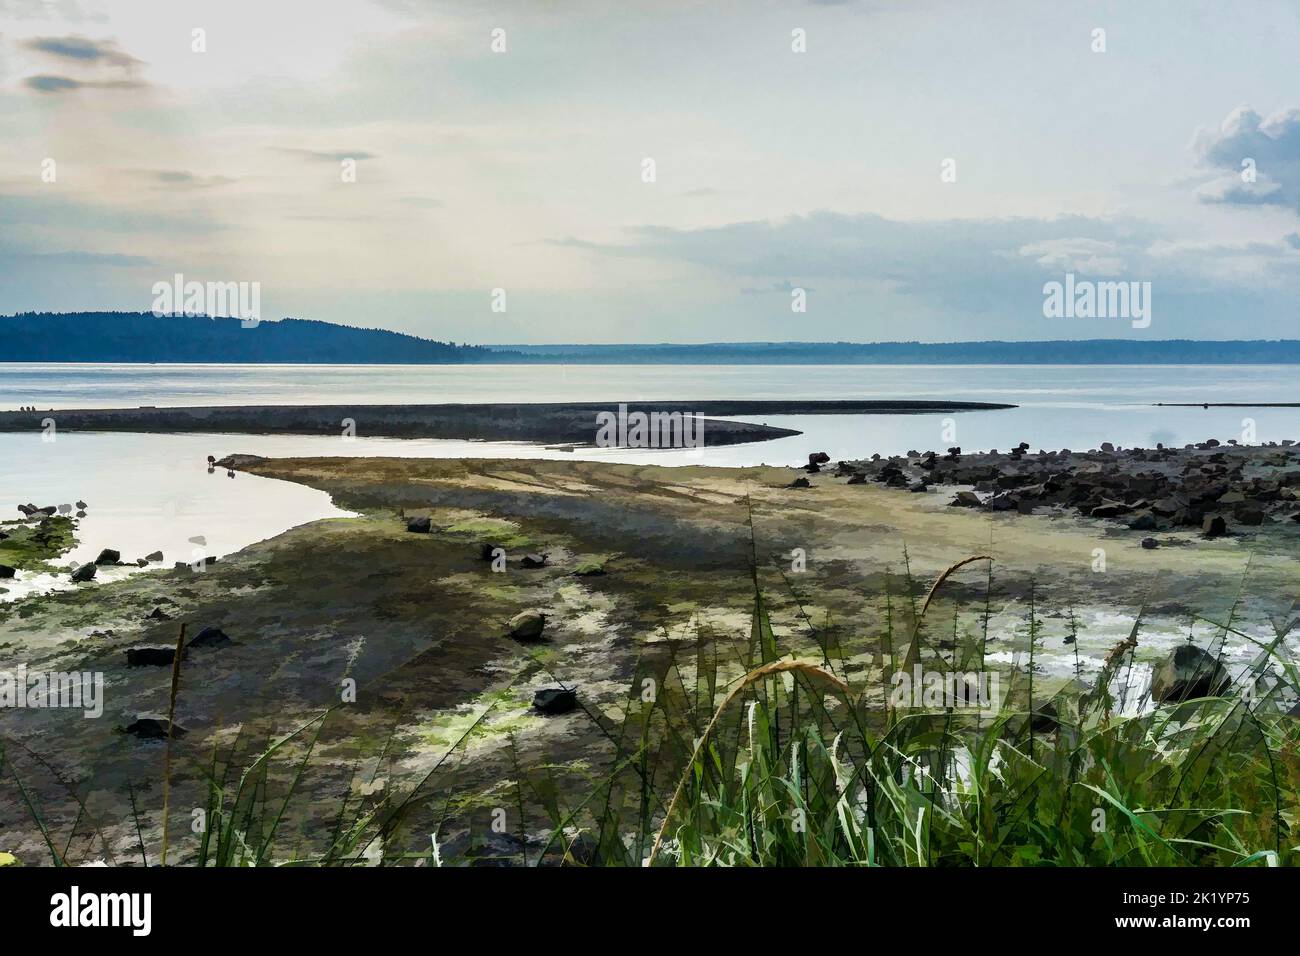 An illustraton of the Puget Sound in Washington State. Stock Photo